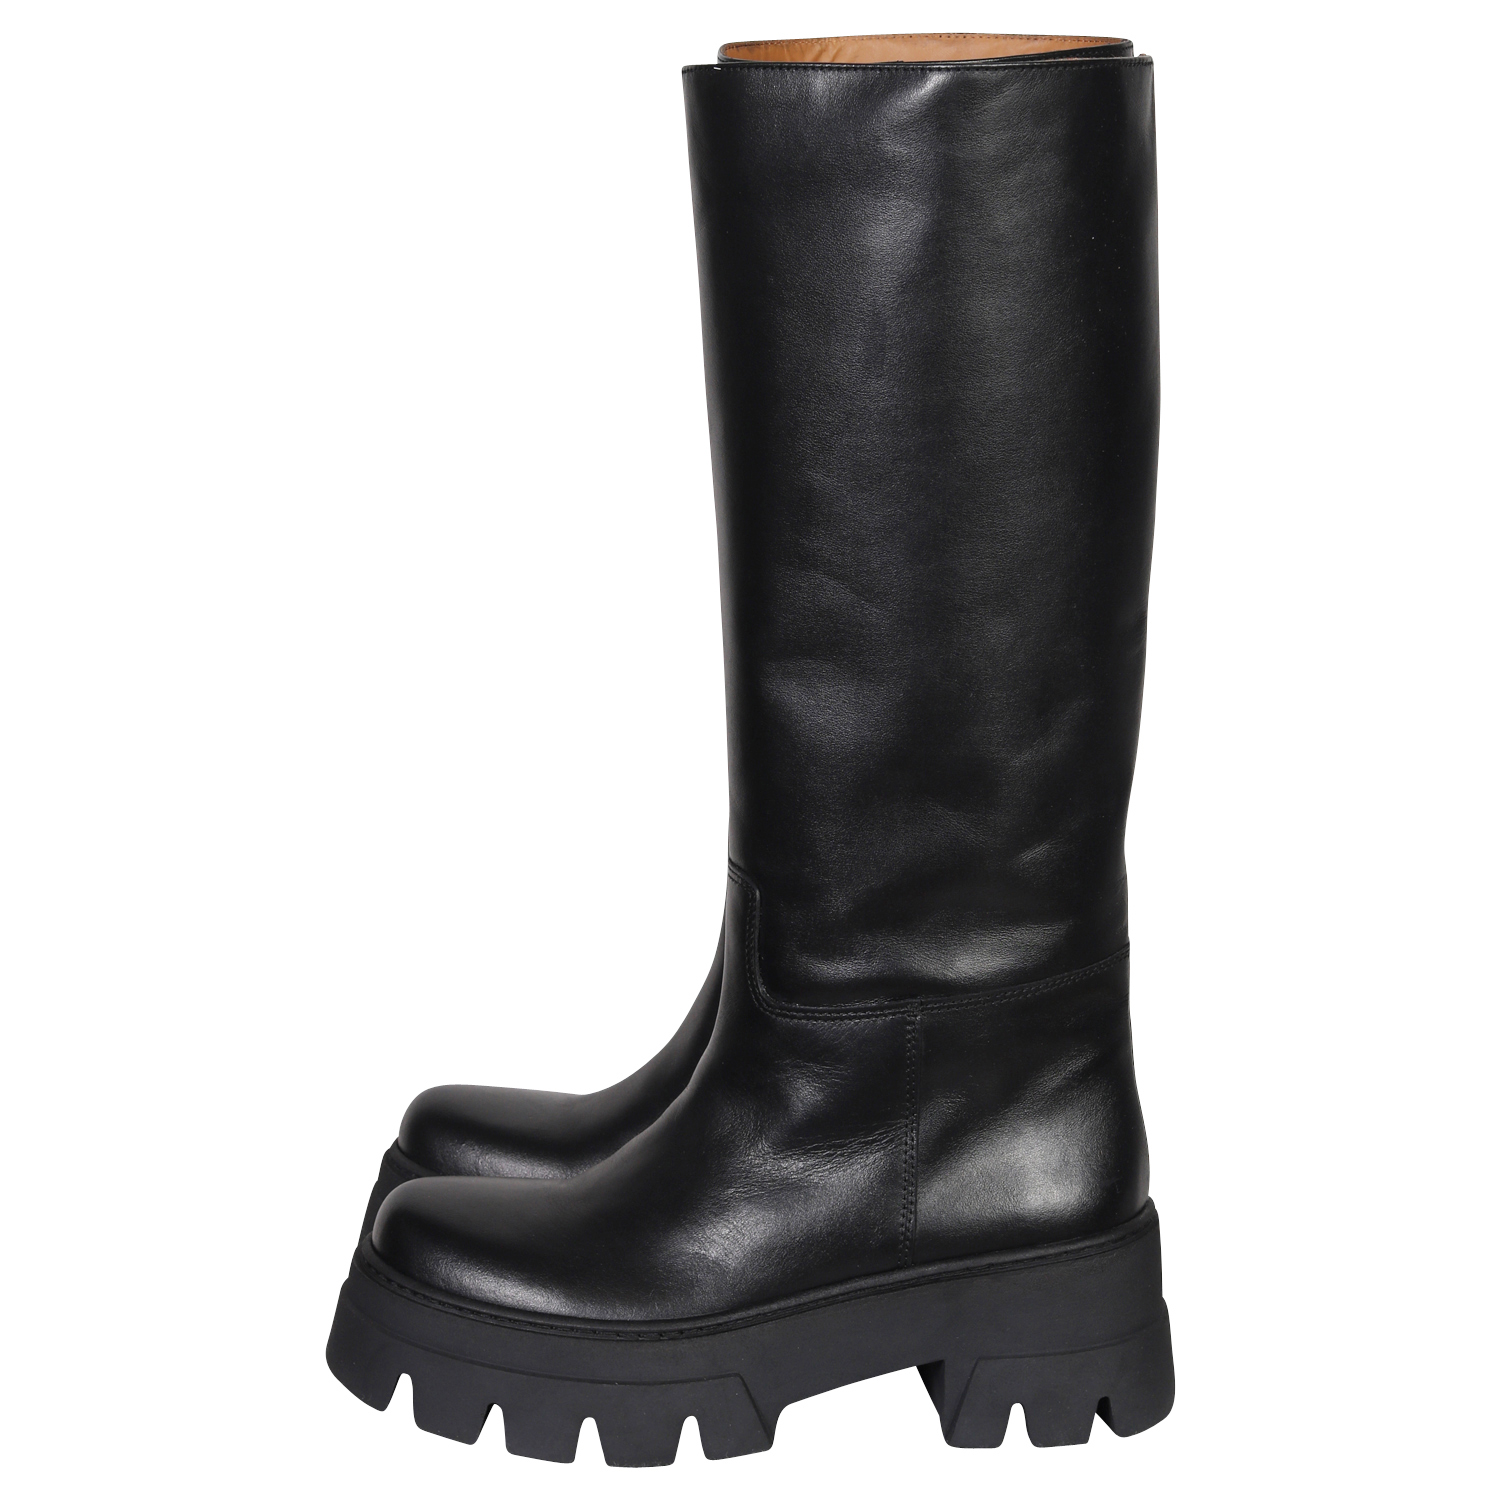 Ennequadro High Combat Boots in Black